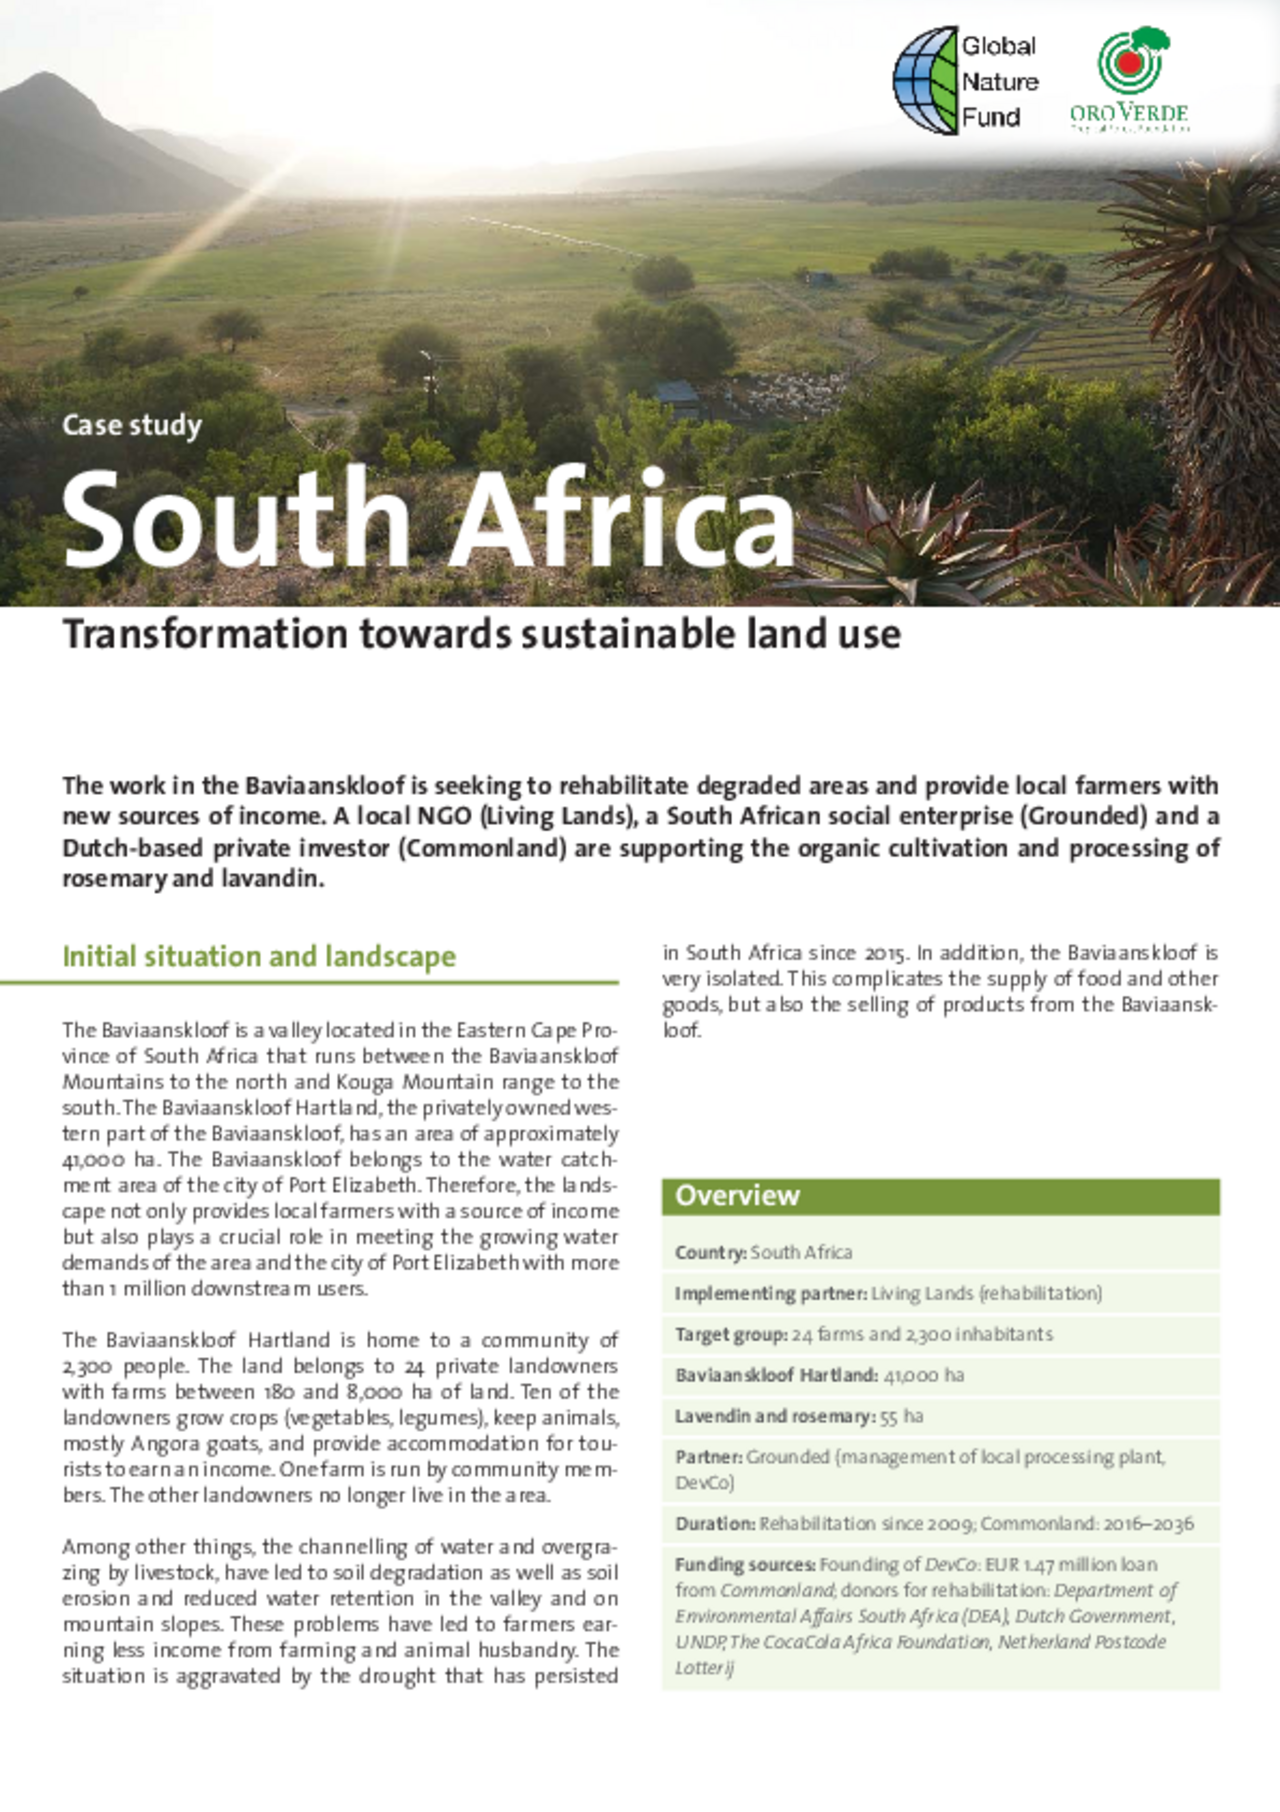 case study South Africa: Transformation towards sustainable land use